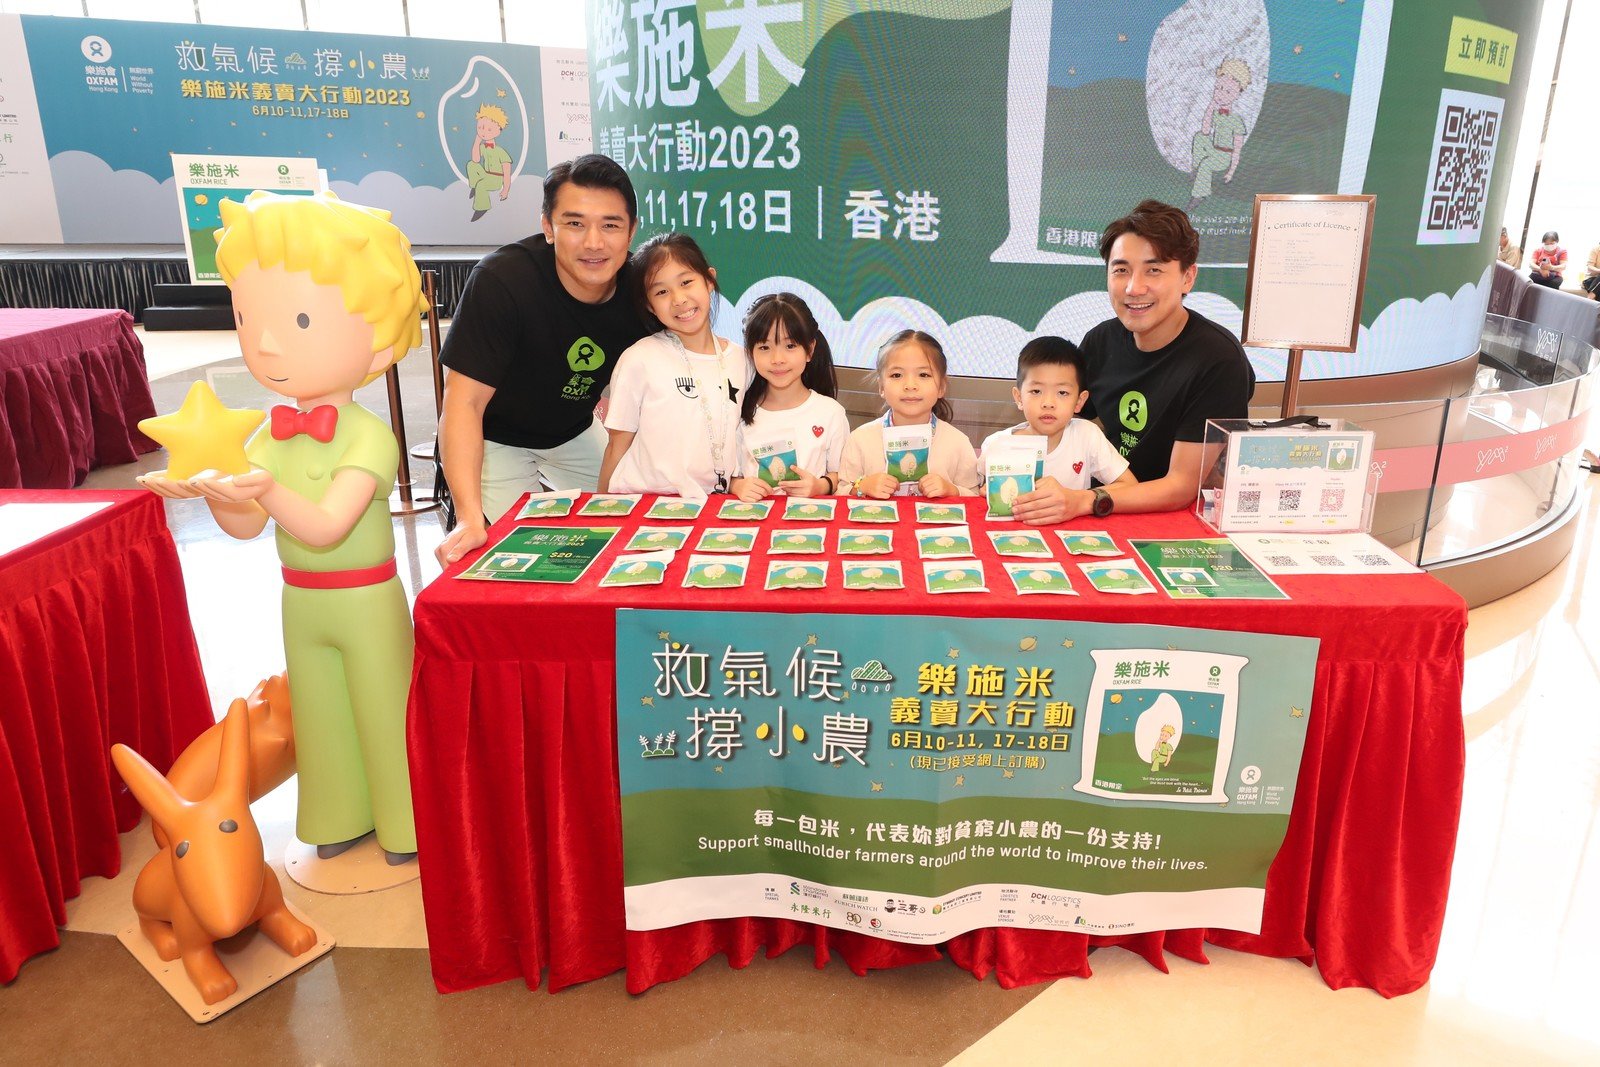 Artists Tony Hung (right 1) and Stefan Wong (left 1), and Stefan Wong’s daughter (left 2) and friends selling Oxfam Rice to support small farmers living in poverty.